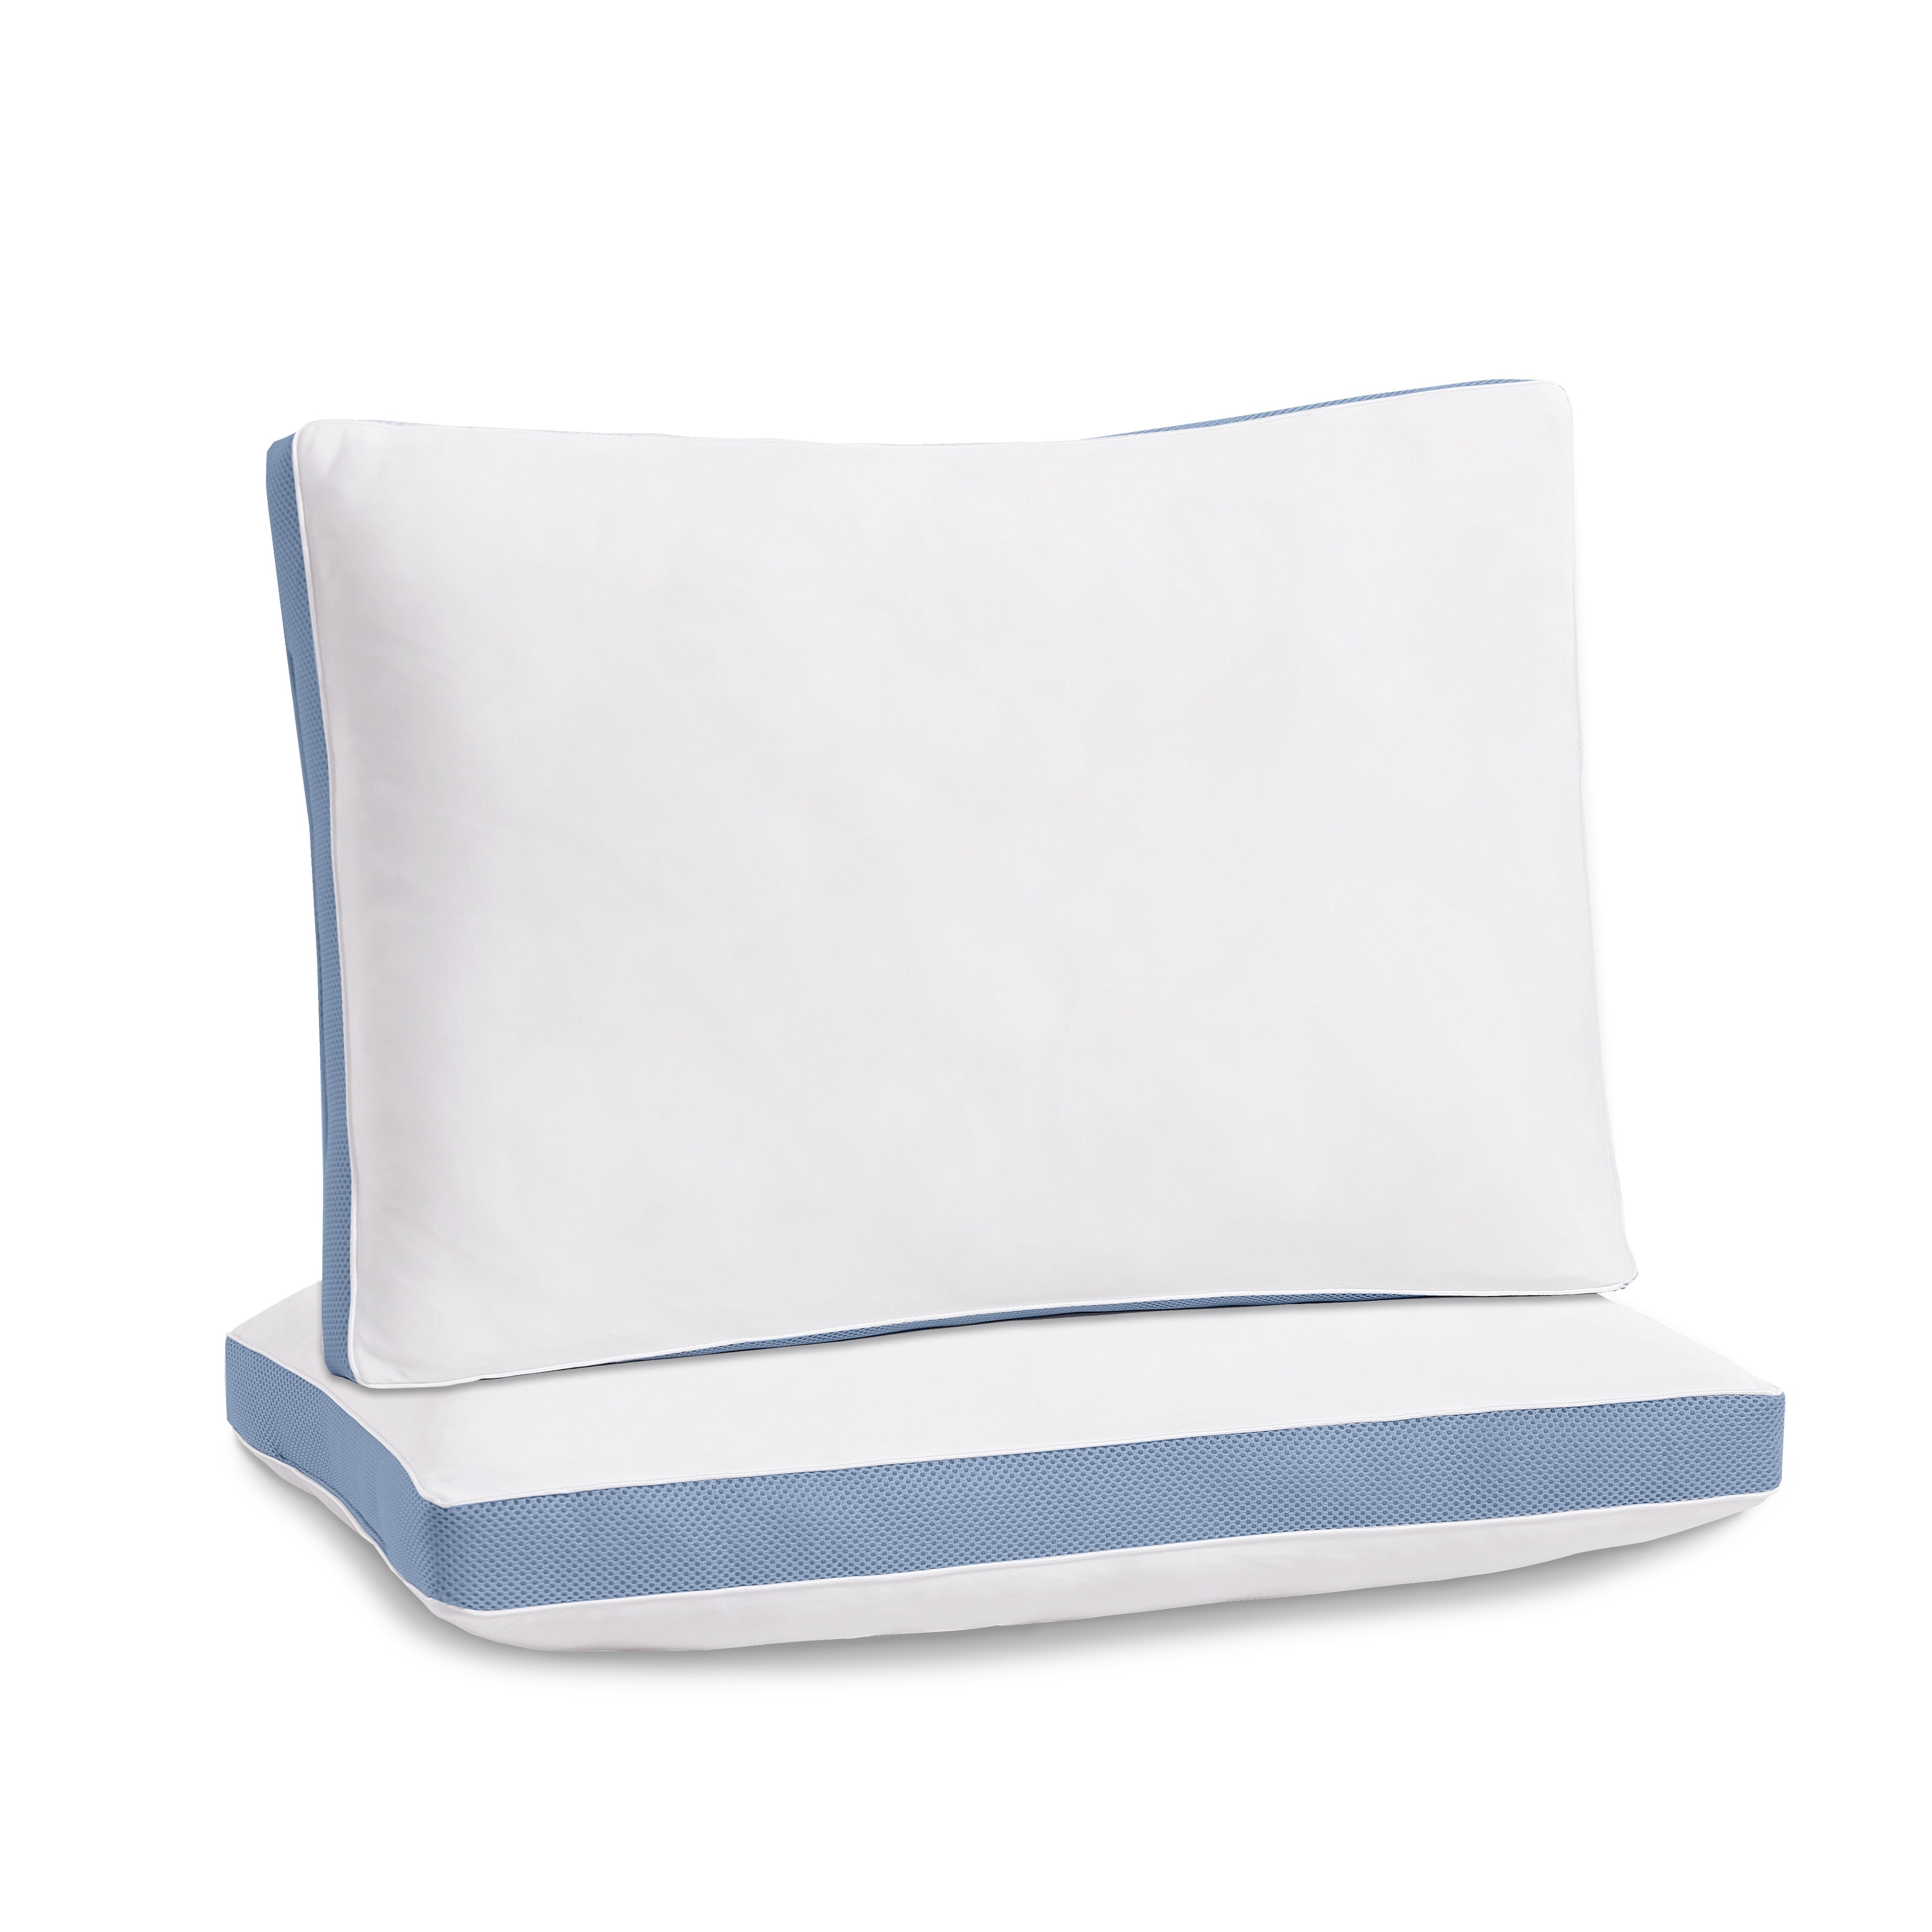 https://ak1.ostkcdn.com/images/products/is/images/direct/b432255b6685292a34fae7e813a8e79458f691b4/DreamLab-Cooling-Sleep-Pillows-for-Back%2C-Stomach-or-Side-Sleepers%2C-Set-of-2.jpg